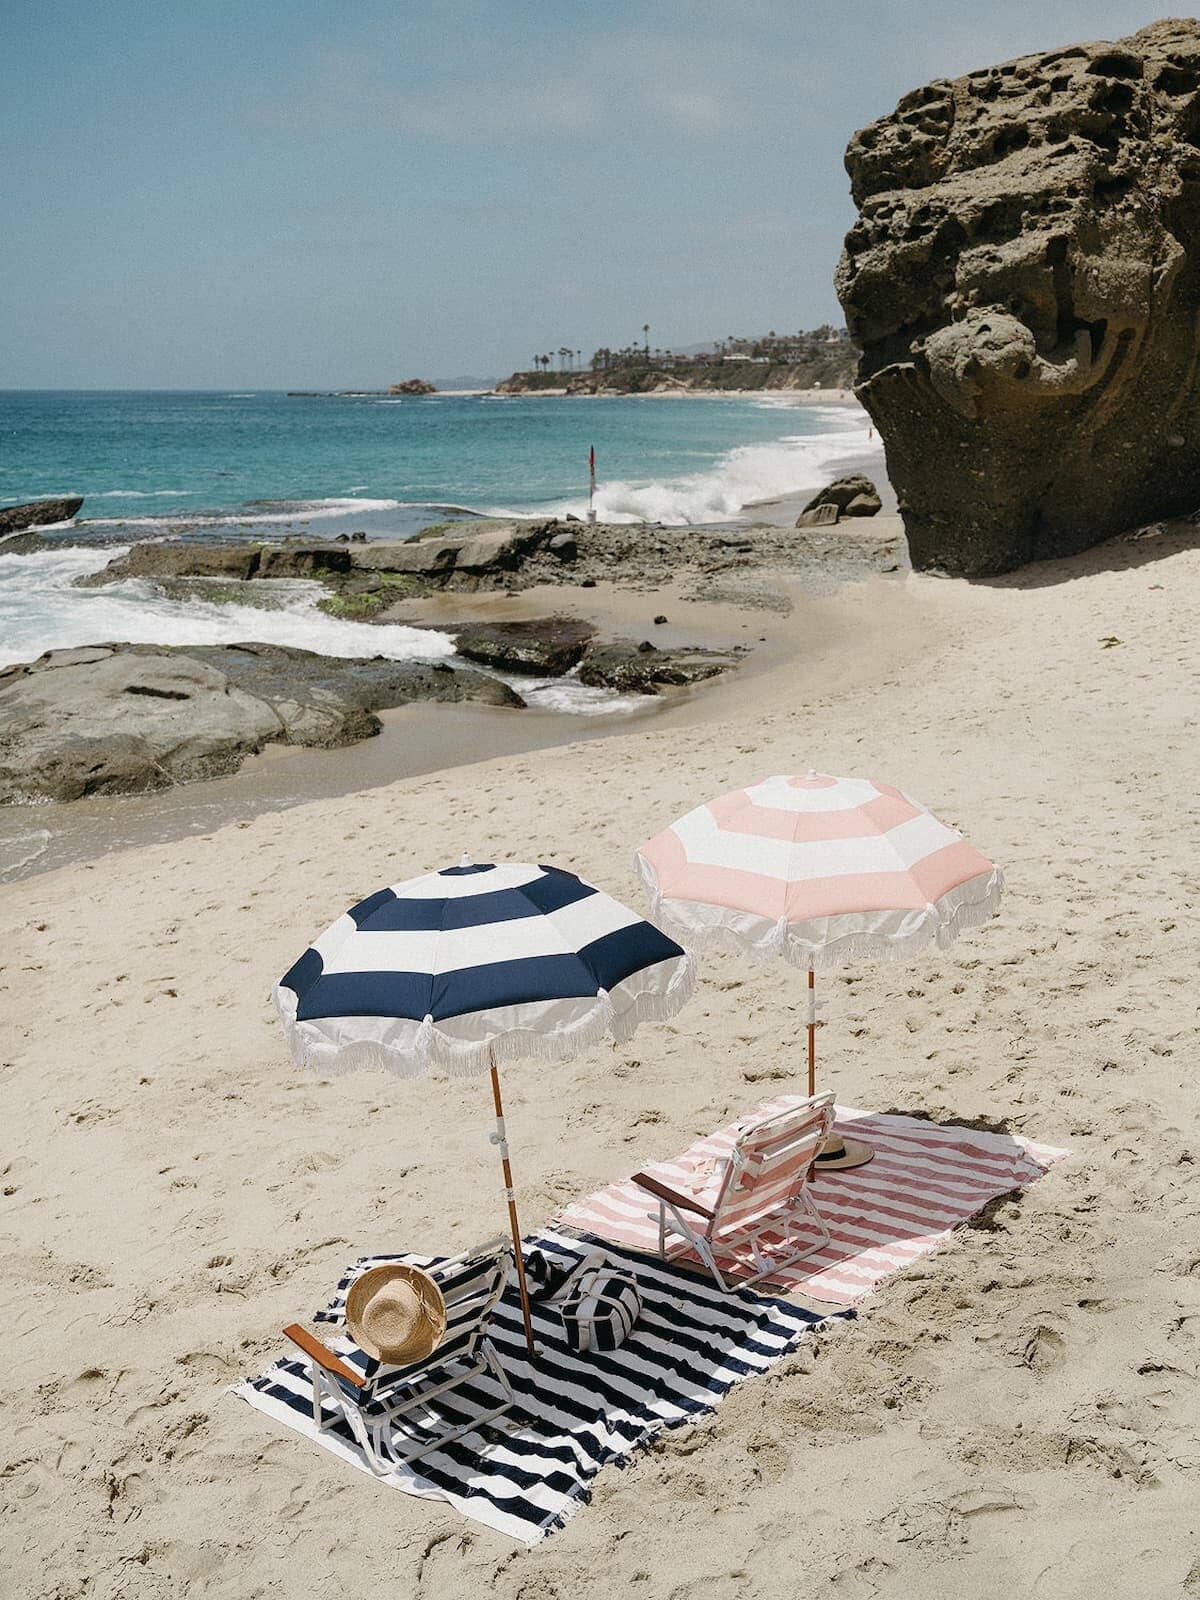 beach setting with navy and pink umbrellas, blankets and chairs